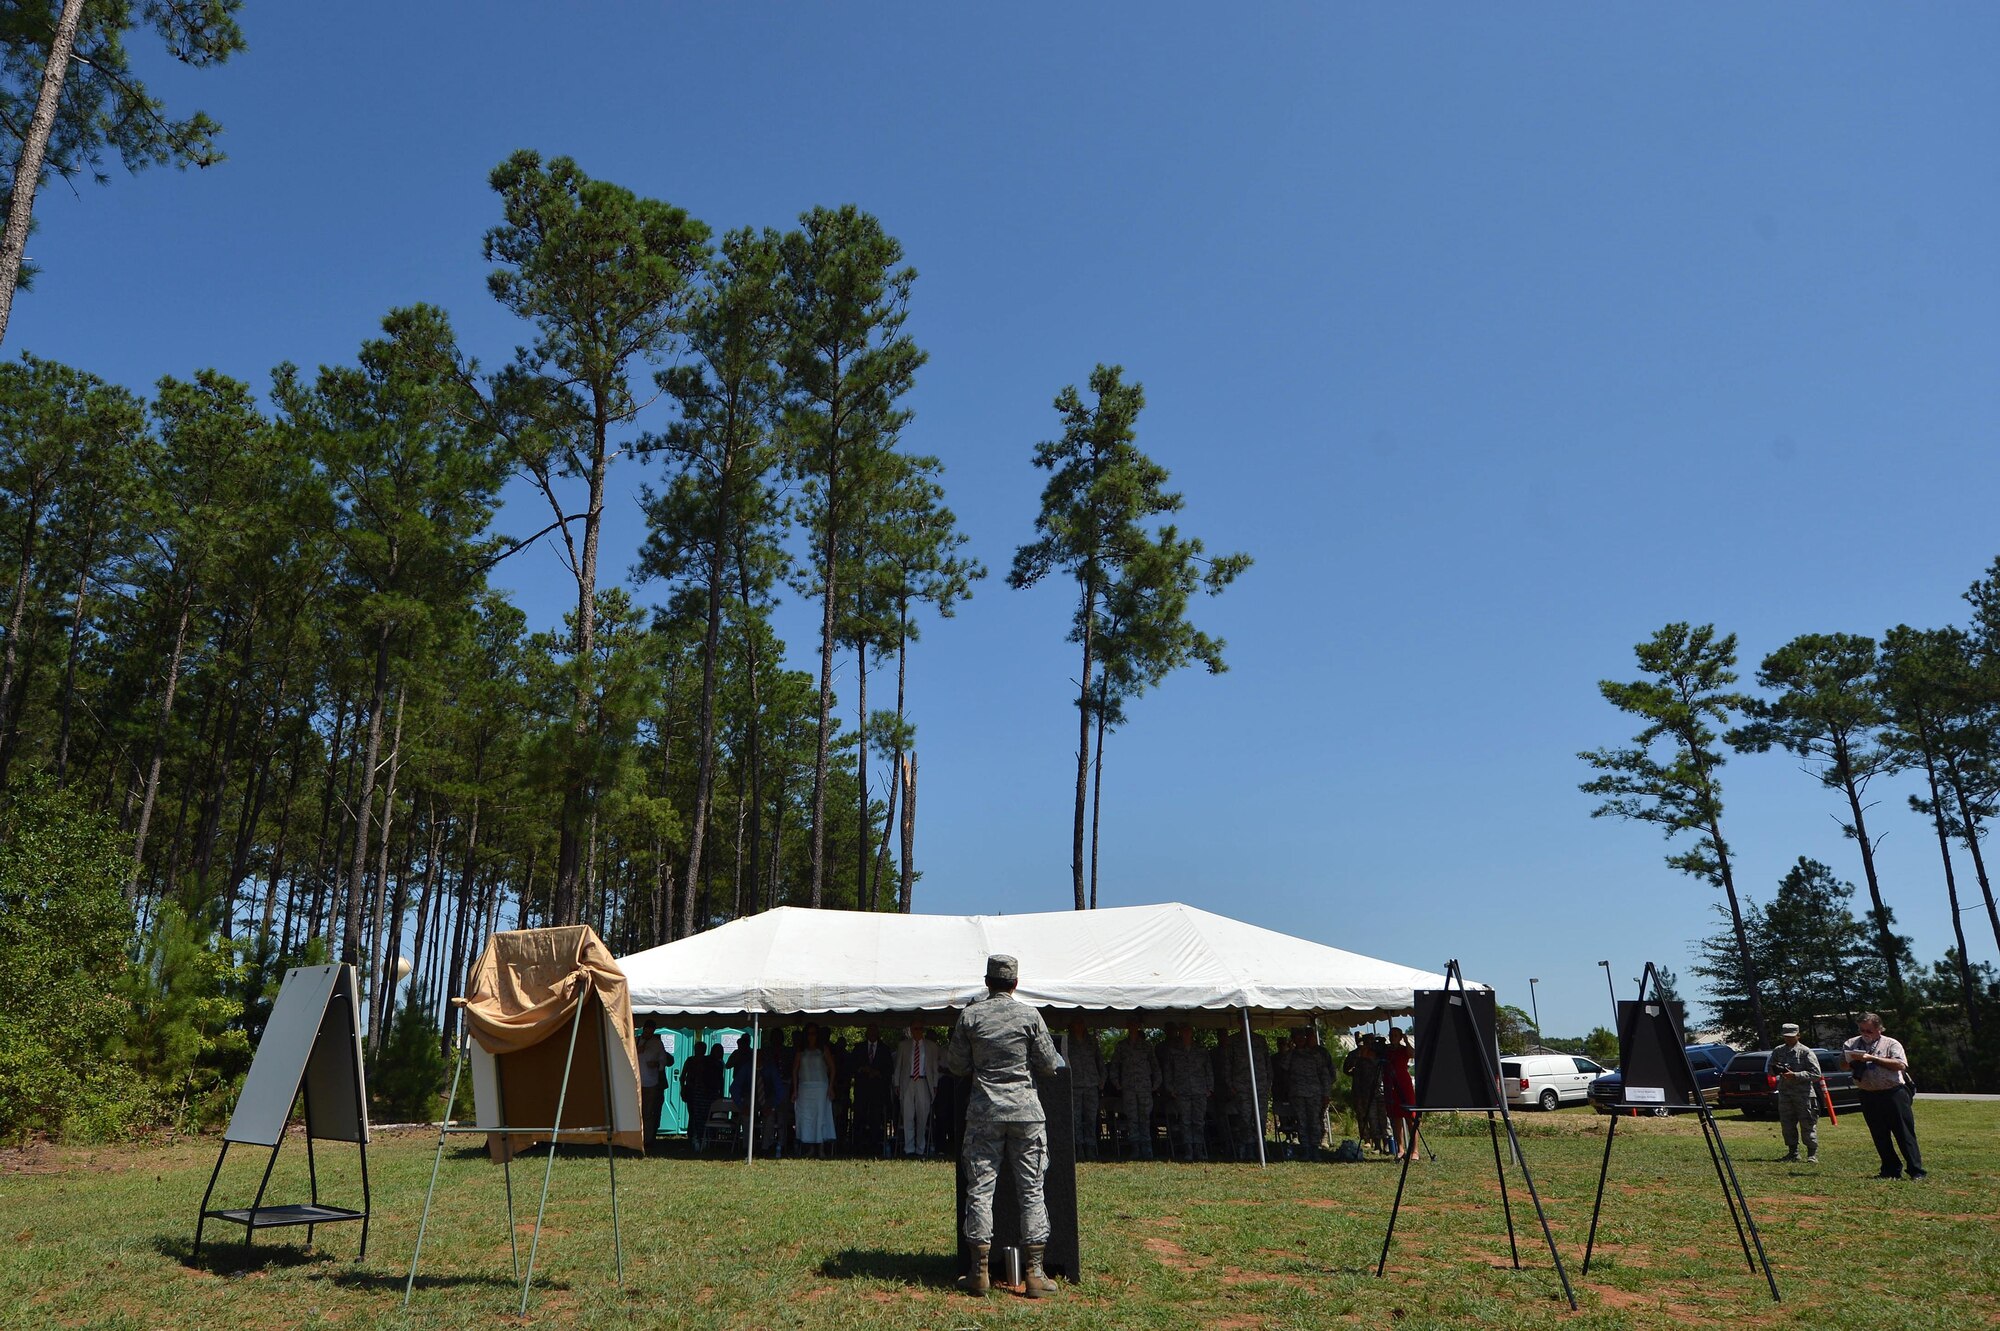 Members of Team Shaw and the Sumter, S.C., community attend a road naming ceremony near the Sumter Gate on Shaw Air Force Base, S.C., July 14, 2016. The previously unnamed road was named in honor of Lt. Col. Willie Ashley and 1st Lt. Leroy Bowman who were both Sumter natives and Tuskegee Airmen who served in World War II. (U.S. Air Force photo by Senior Airman Michael Cossaboom)